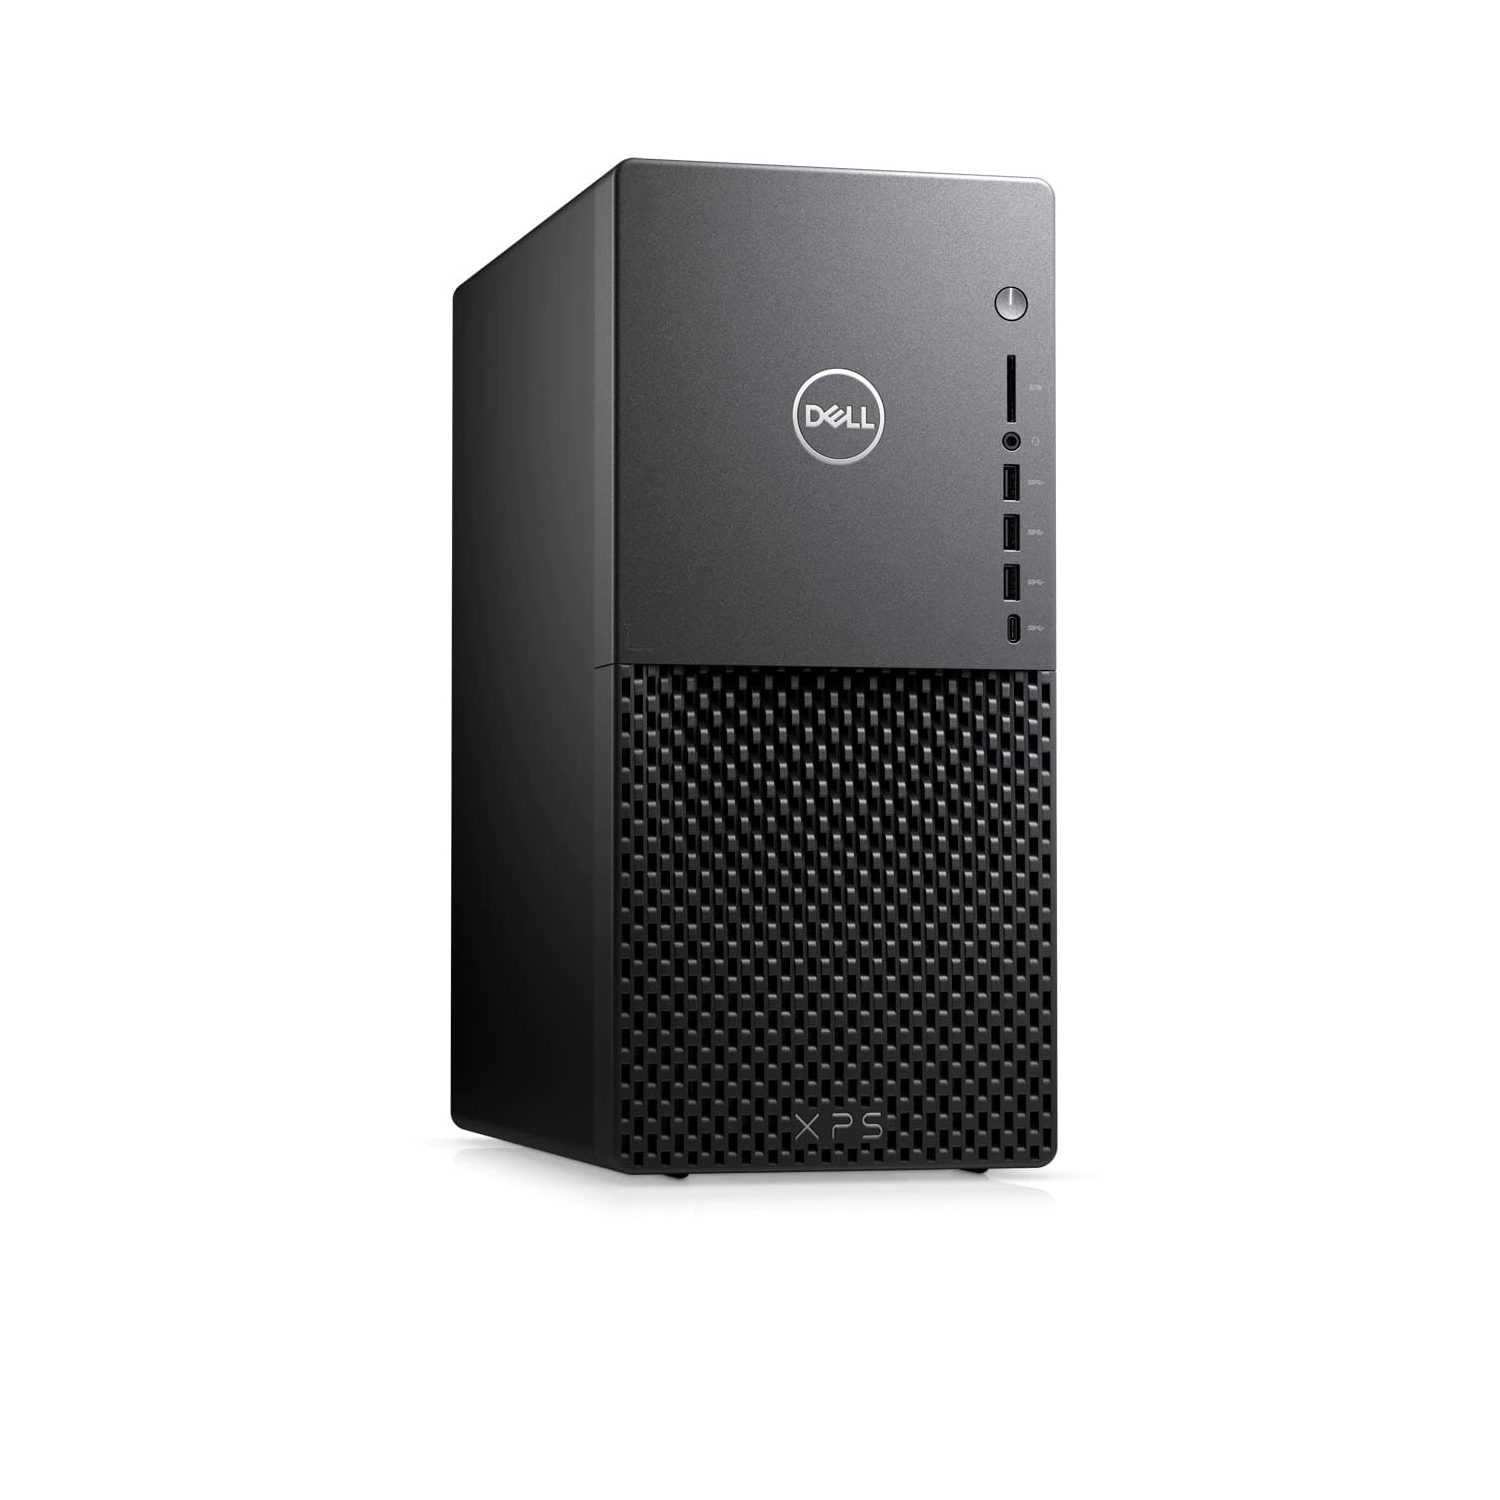 Refurbished (Excellent) - Dell XPS 8940 Desktop (2020) | Core i7 - 1TB HDD + 256GB SSD - 16GB RAM - 1660 Ti | 8 Cores @ 4.9 GHz - 11th Gen CPU Certified Refurbished